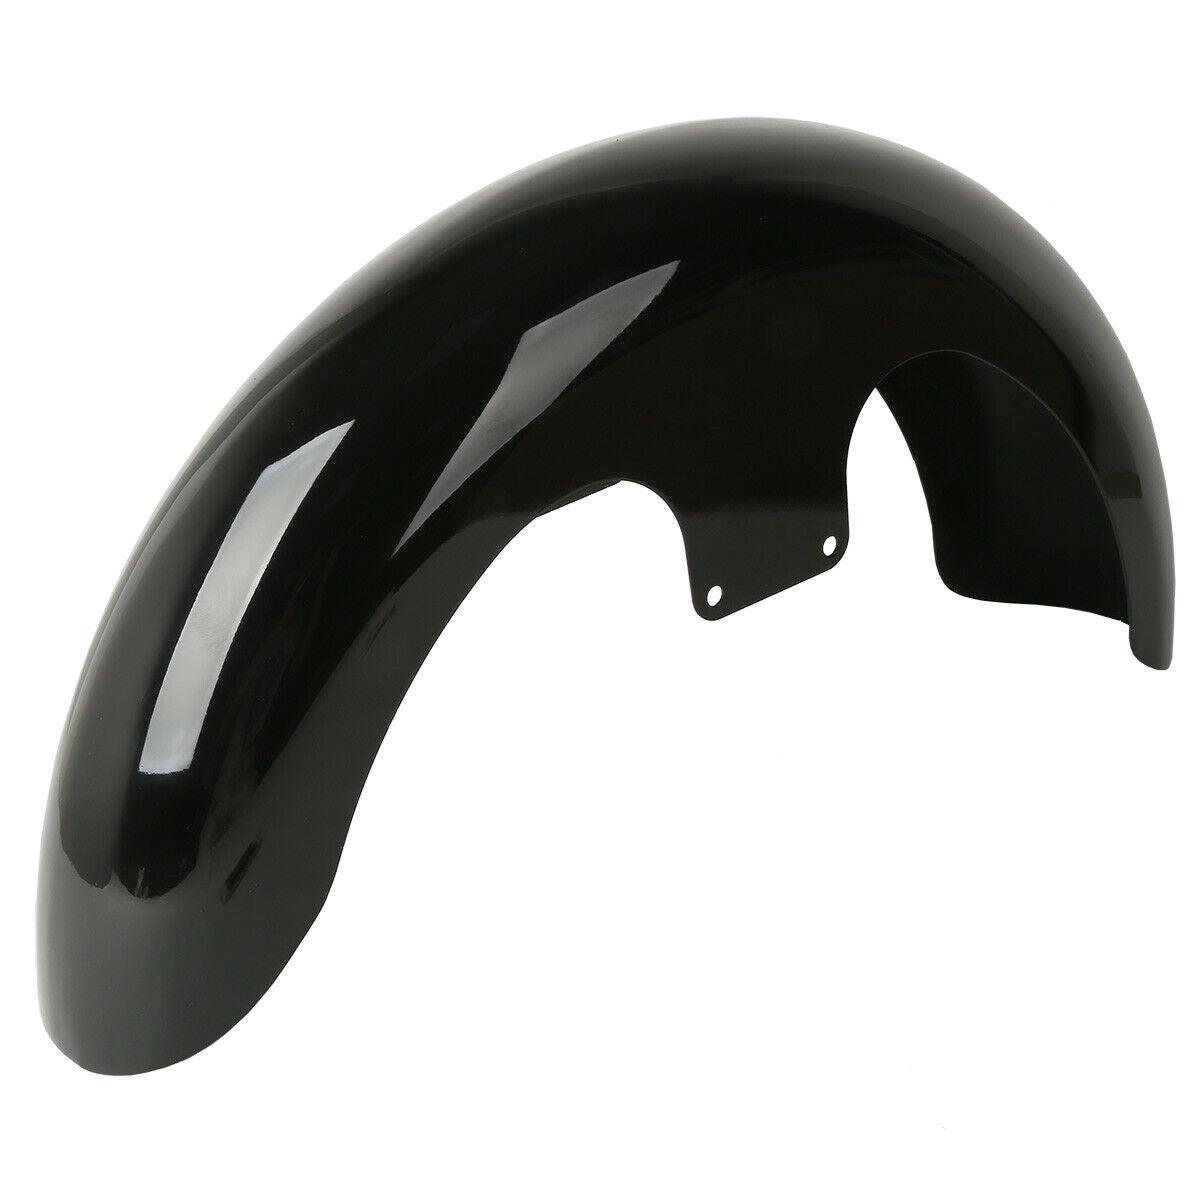 23" Wrap Custom Front Fender Fit For Harley Bagger Street Glide Road King 97-13 - Moto Life Products